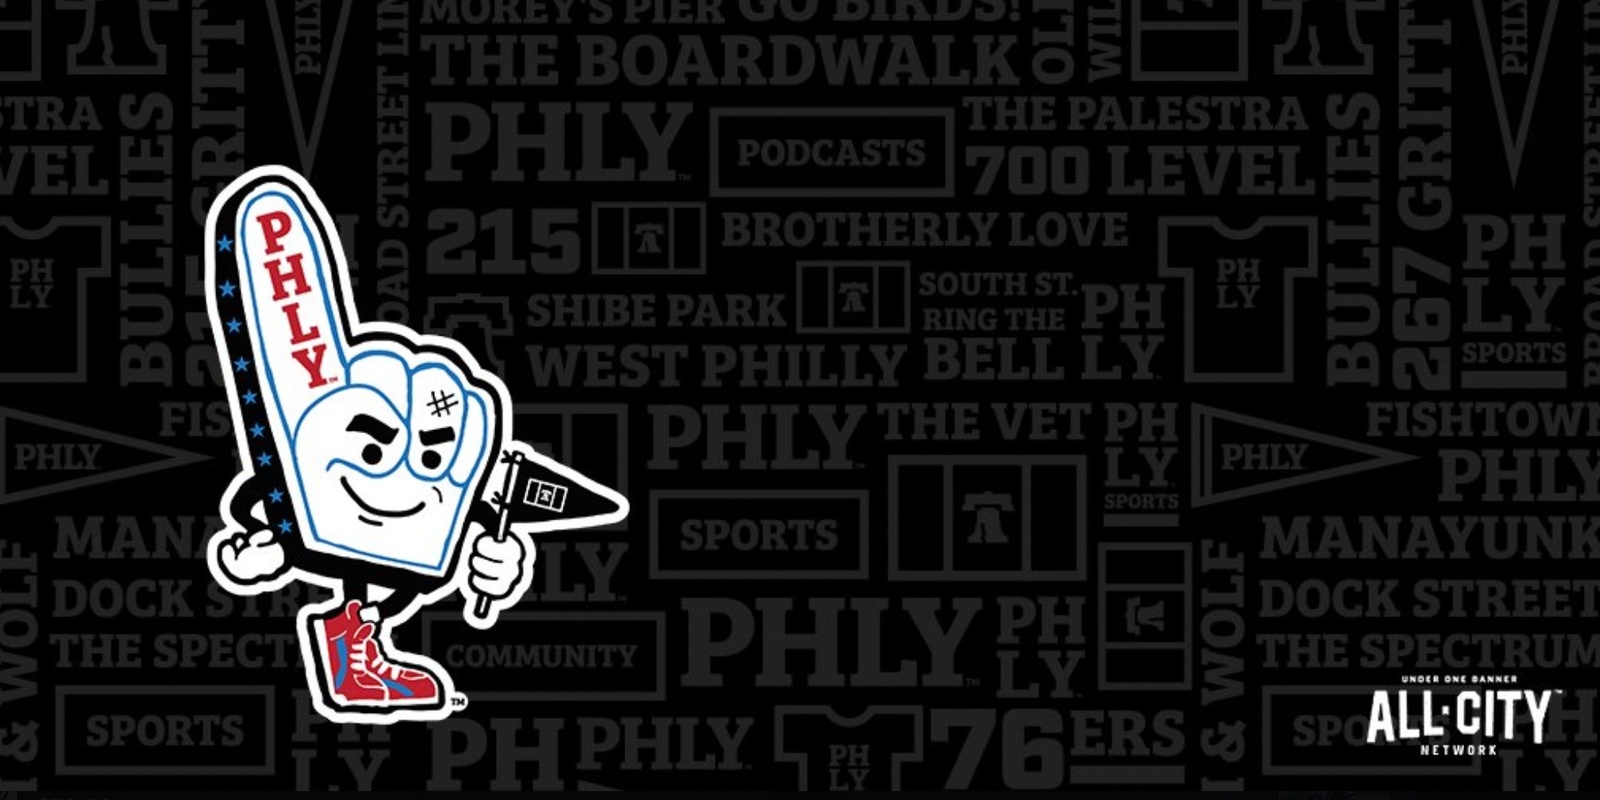 PHLY Sports's banner